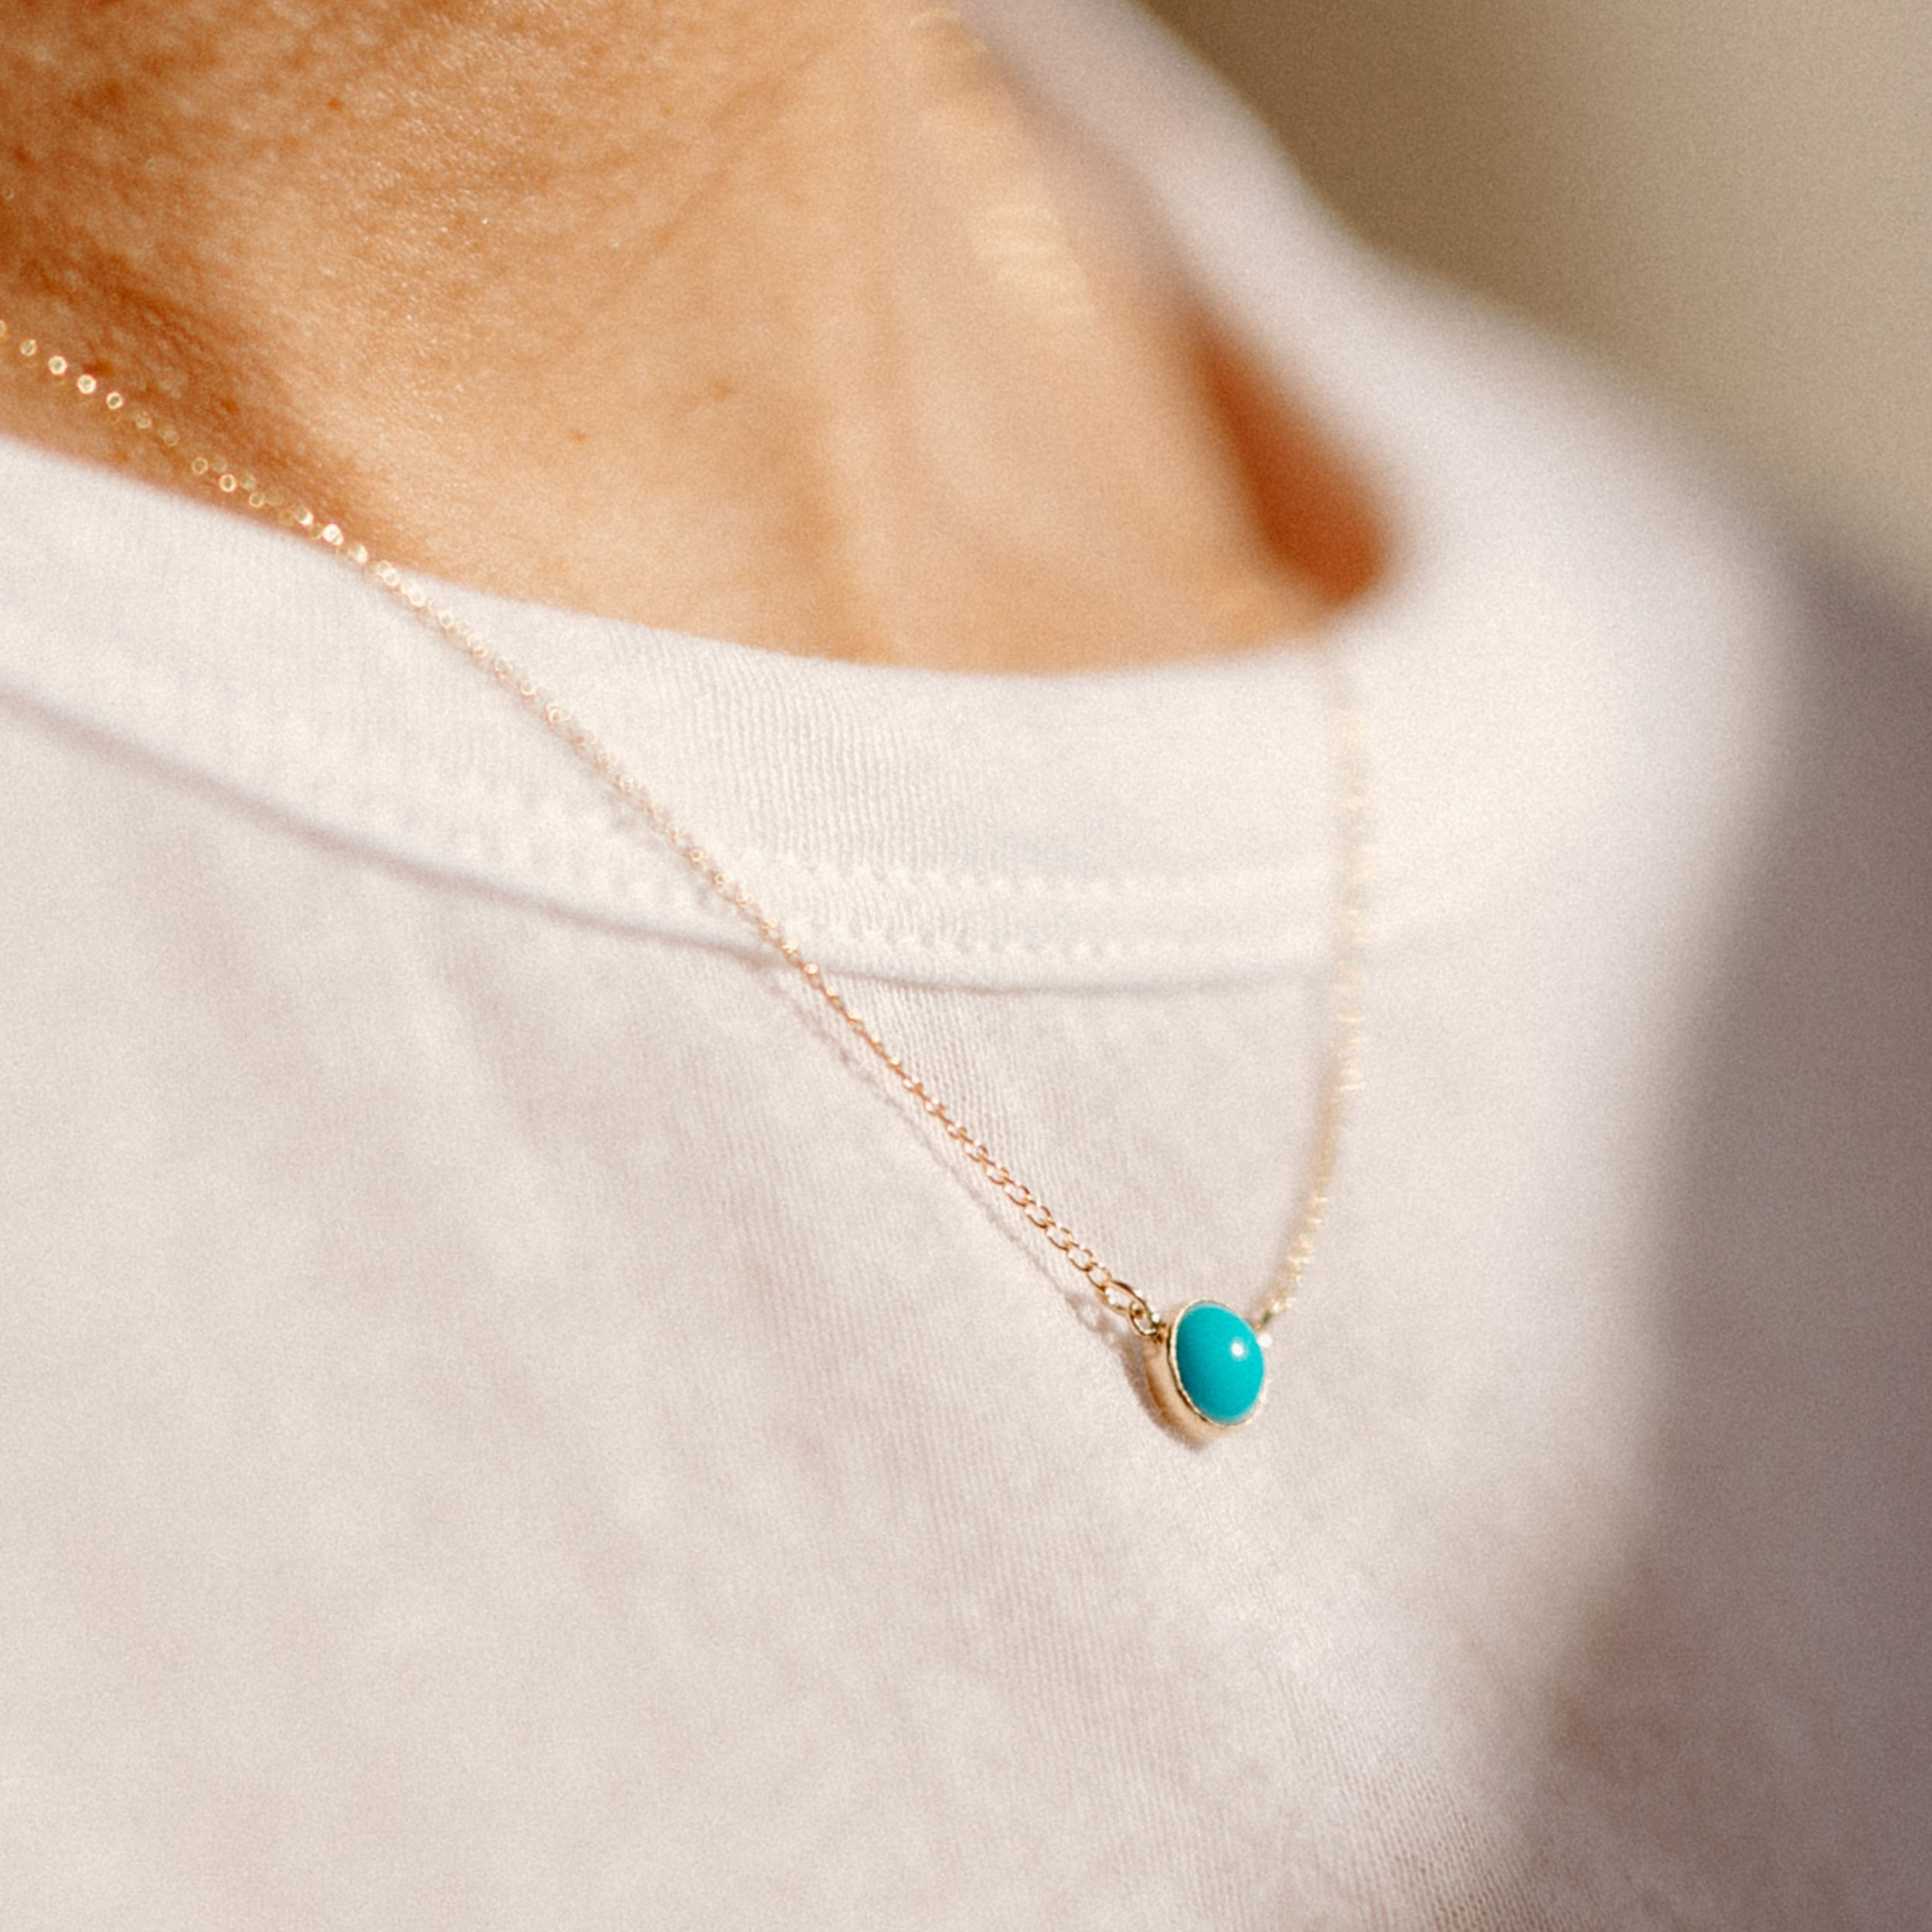 Ethically Sourced Turquoise Gemstone Necklace 14k Gold Fill - Favor Jewelry